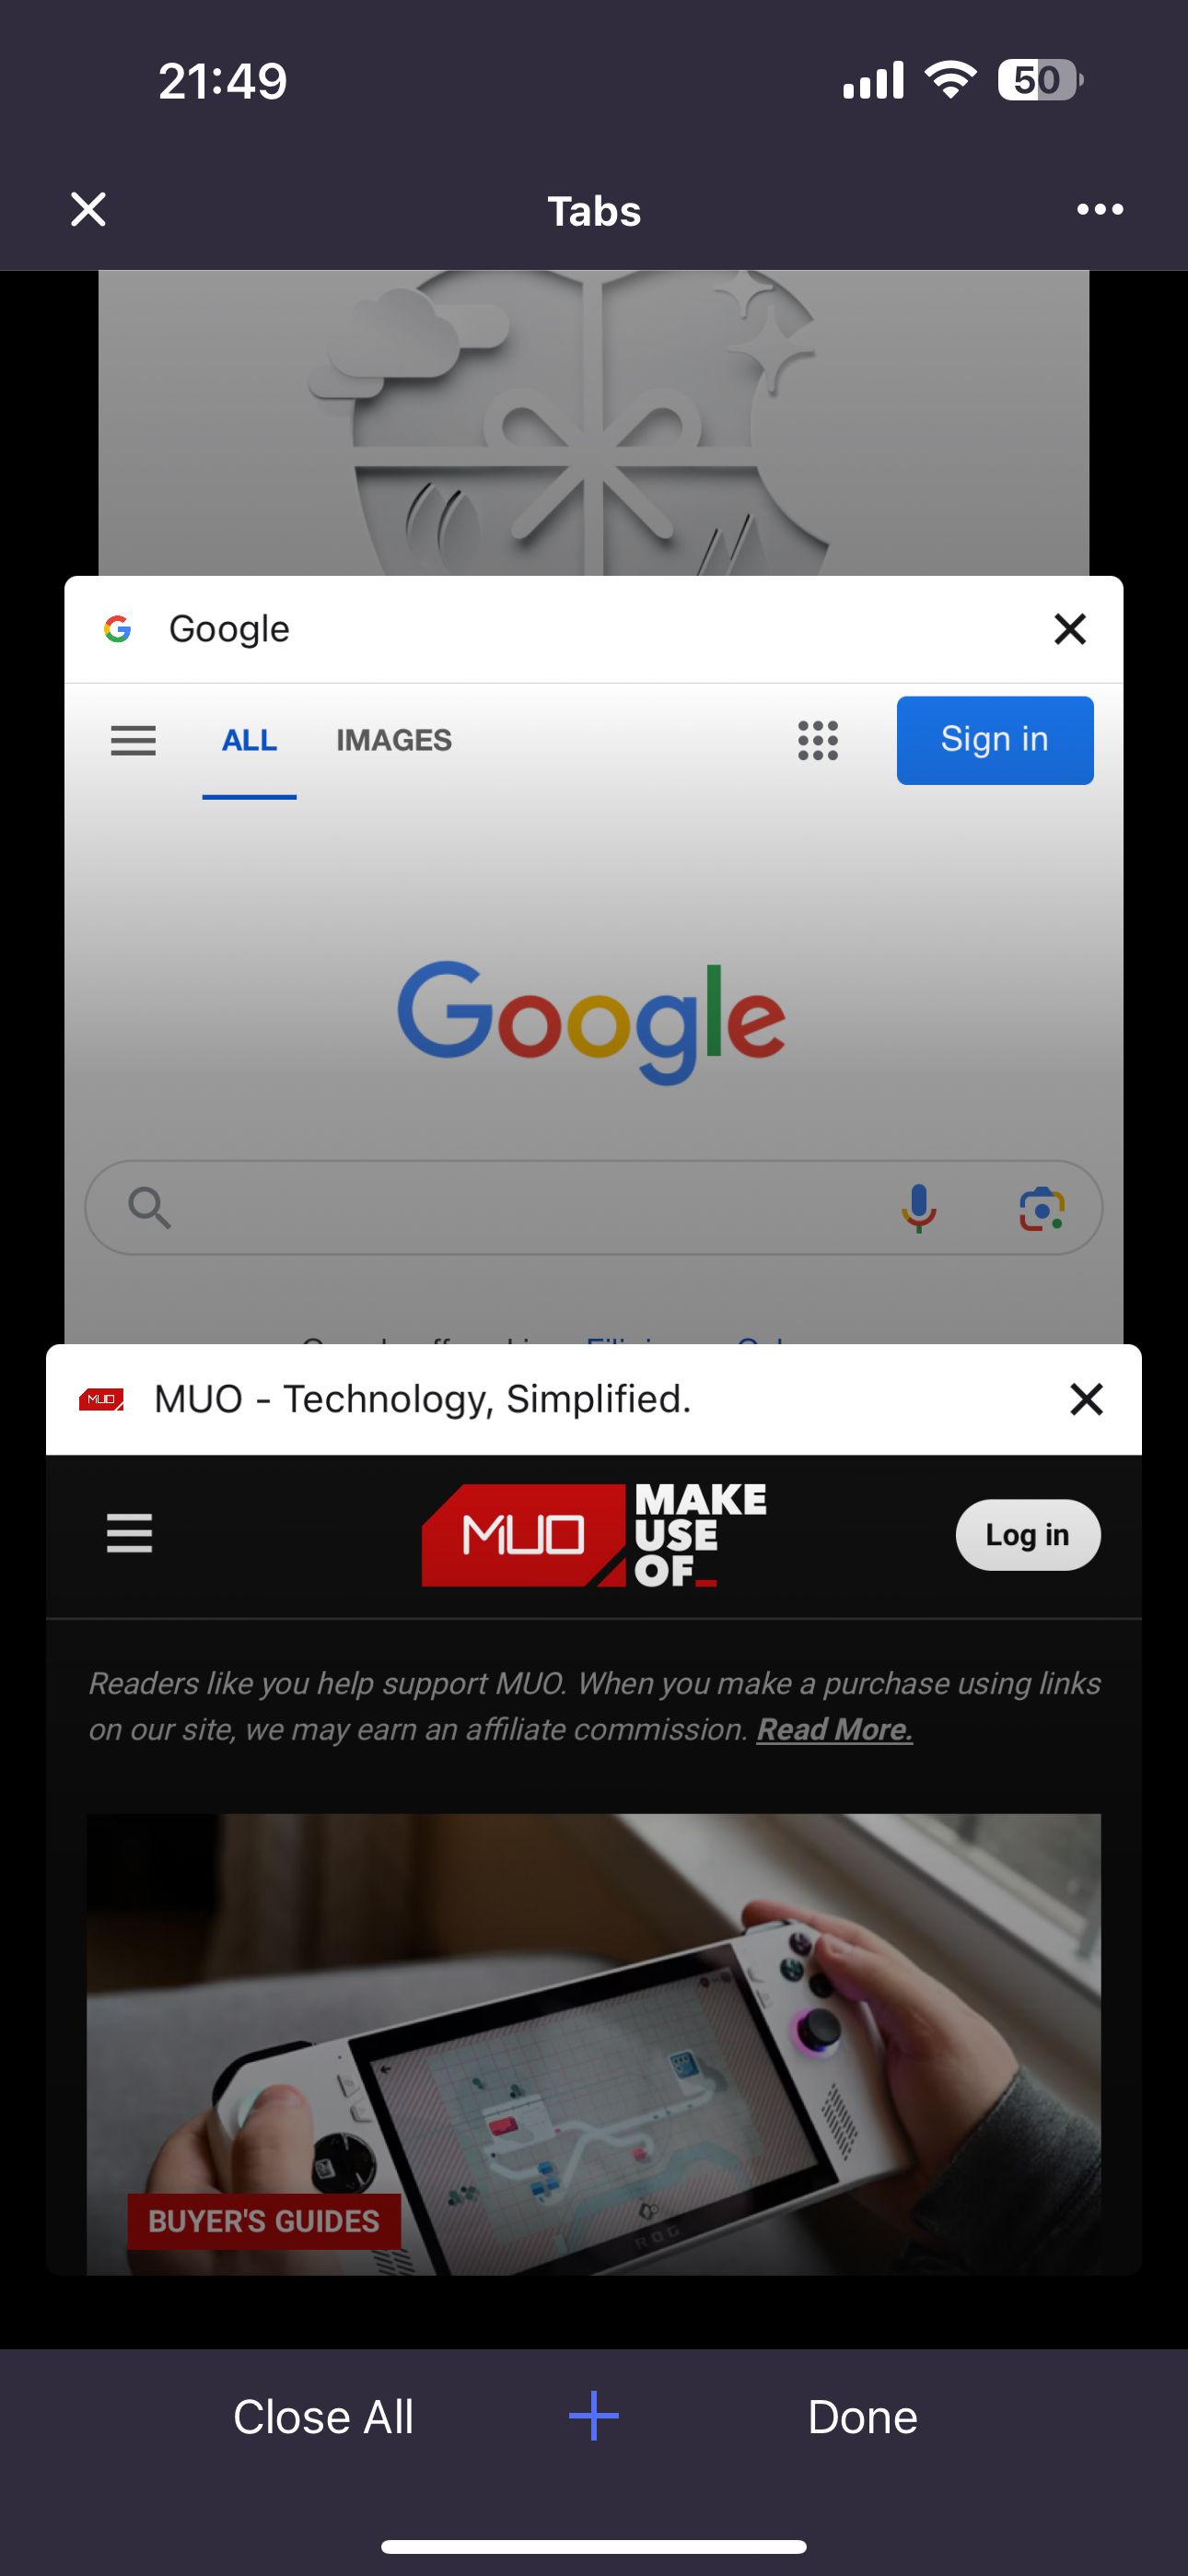 Tabs in Opera browser